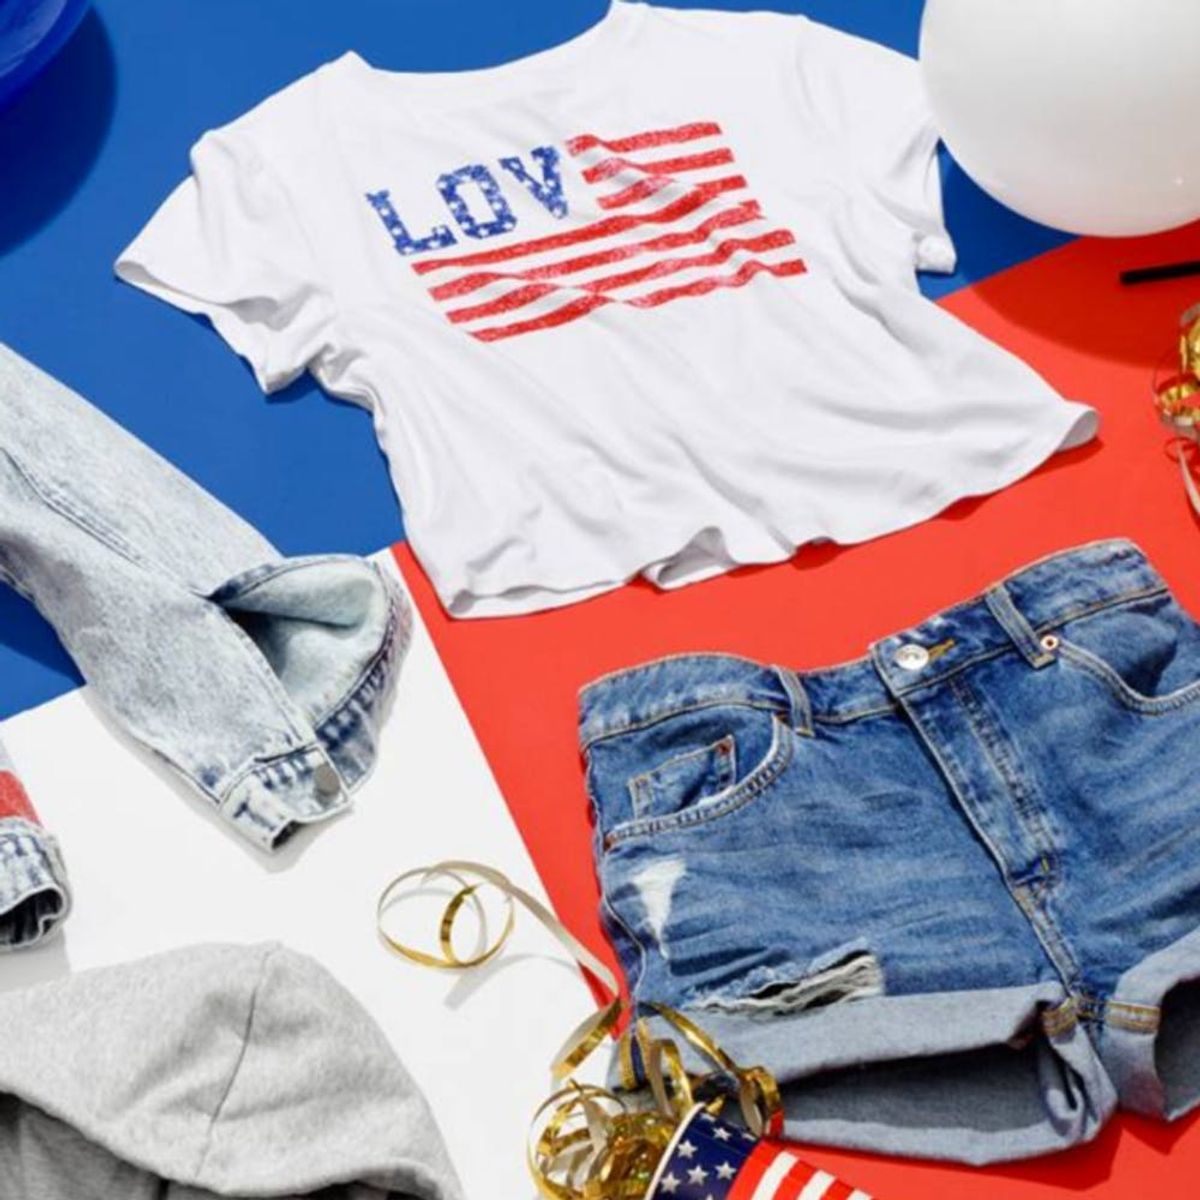 Shop These Killer 4th of July Sales Before Your Backyard BBQs